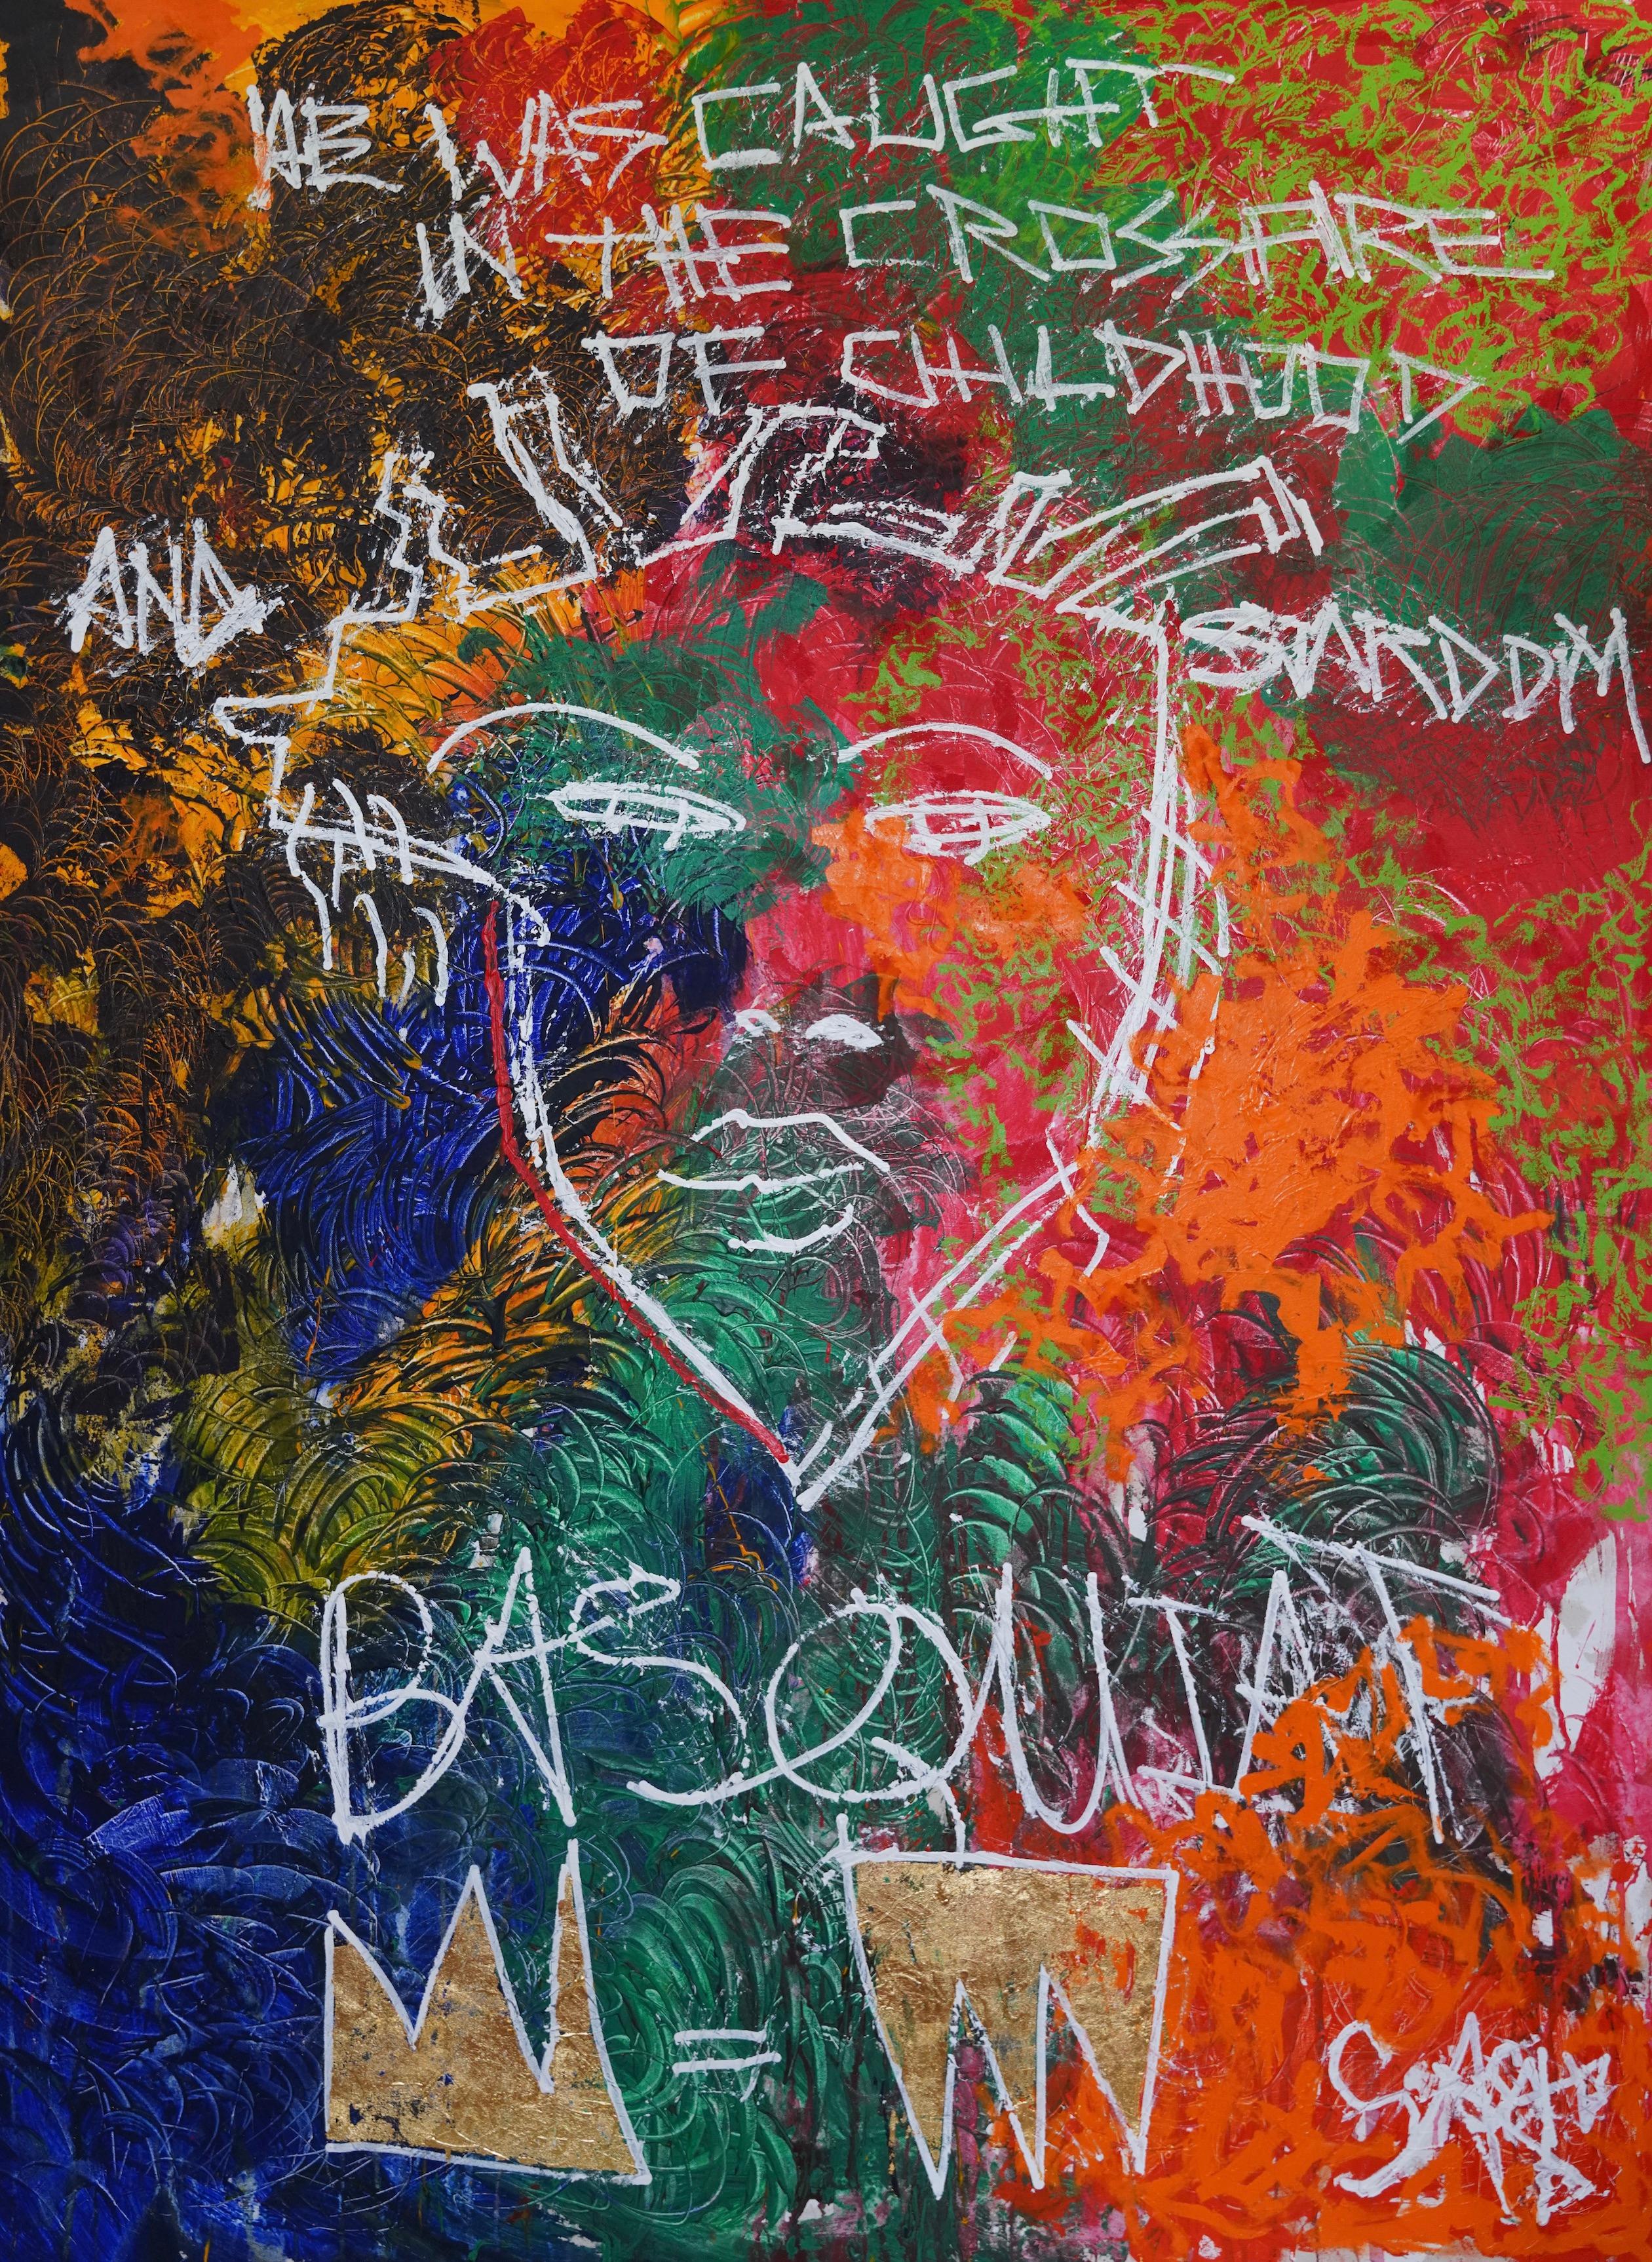 Sax Berlin Figurative Painting - BASQUIAT : Caught in the Crossfire:  Large Neo Expressionist Oil Painting